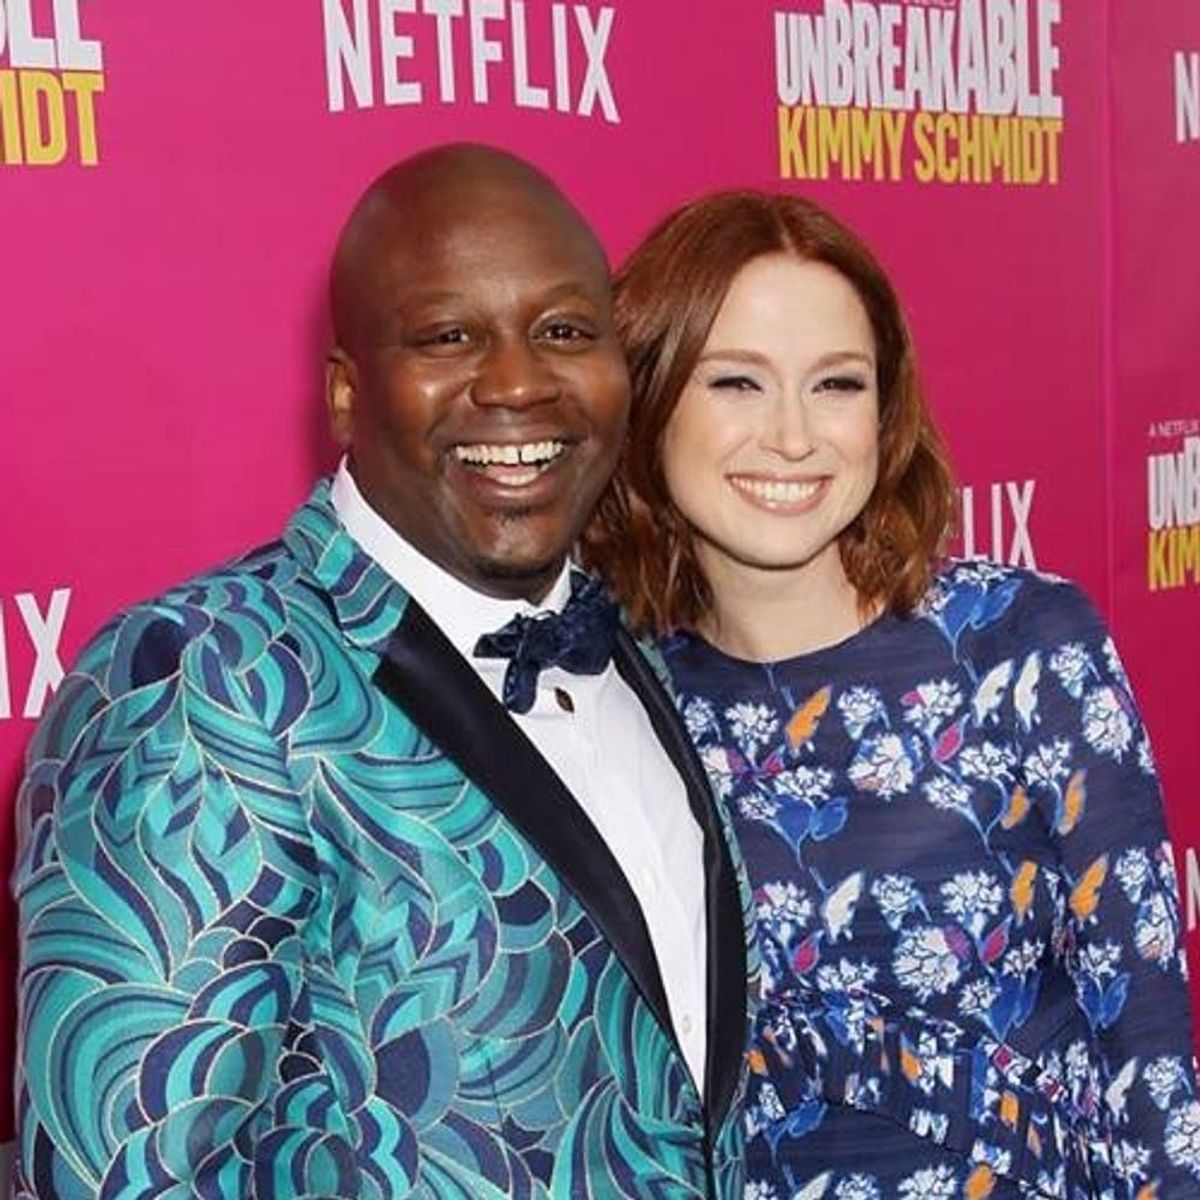 Watch Kimmy Schmidt’s Titus Andromedon HILARIOUSLY Audition for “Hamilton”